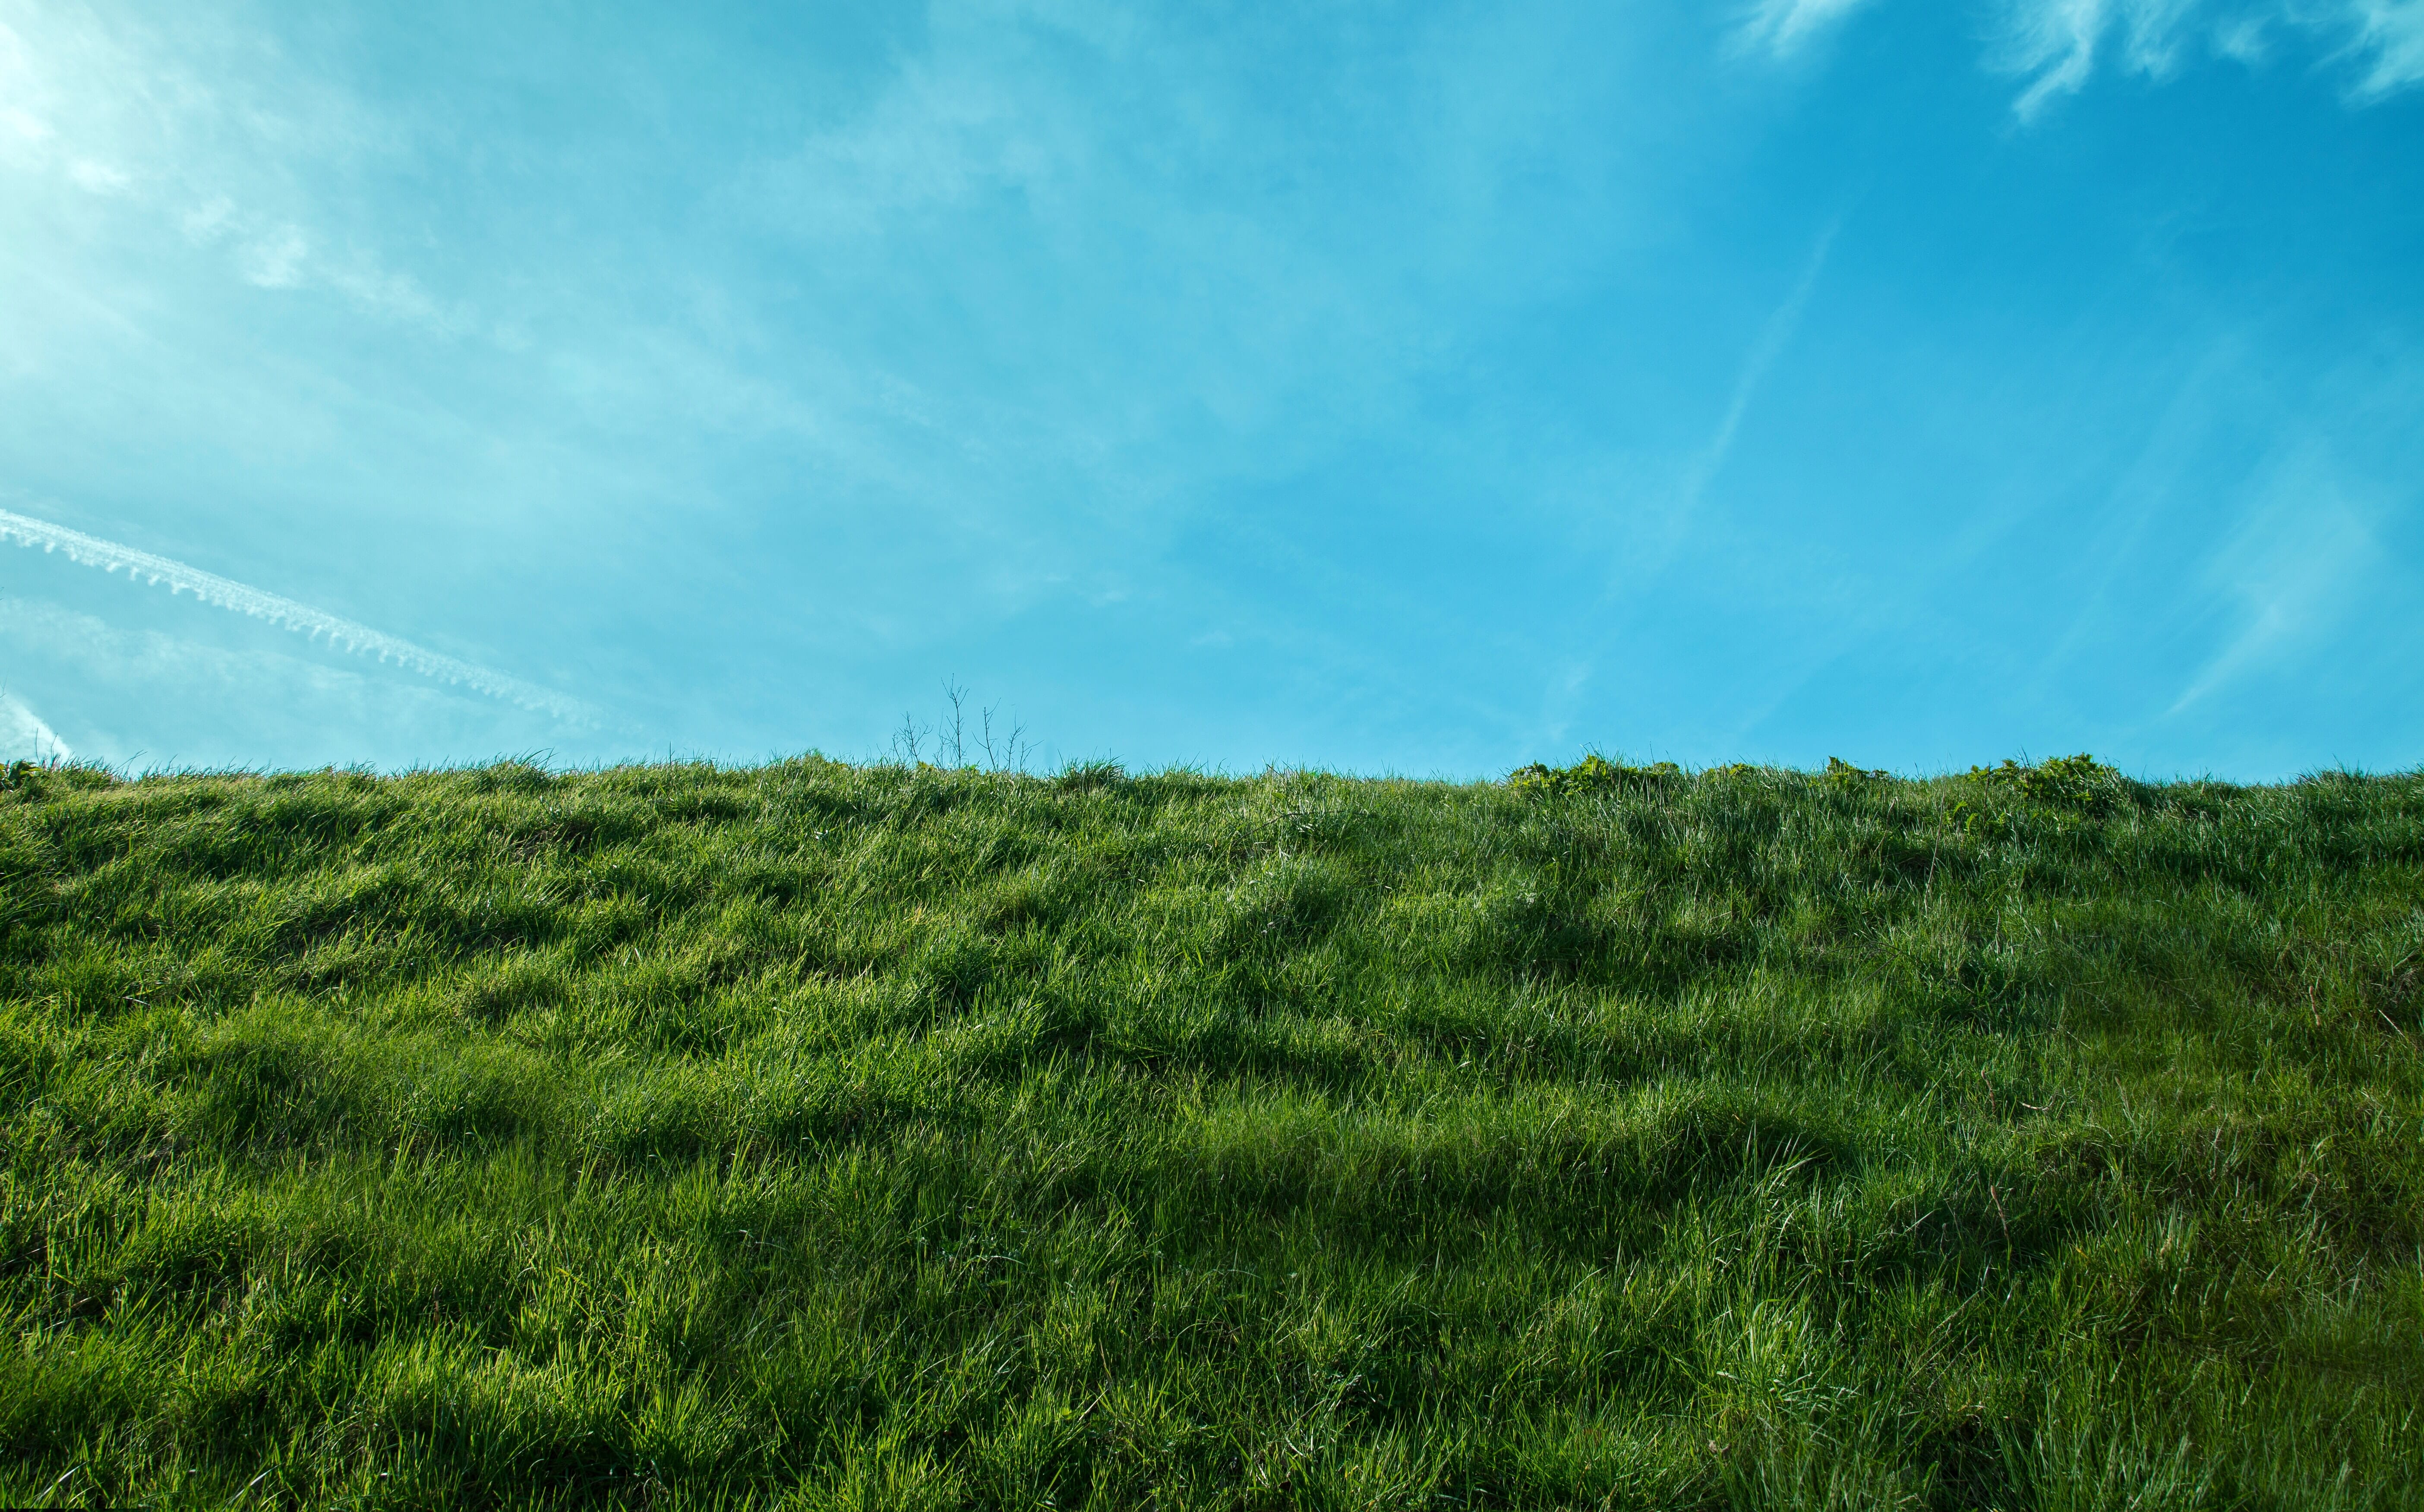 Green grass on a hill against a bright blue sky with wisps of clouds.